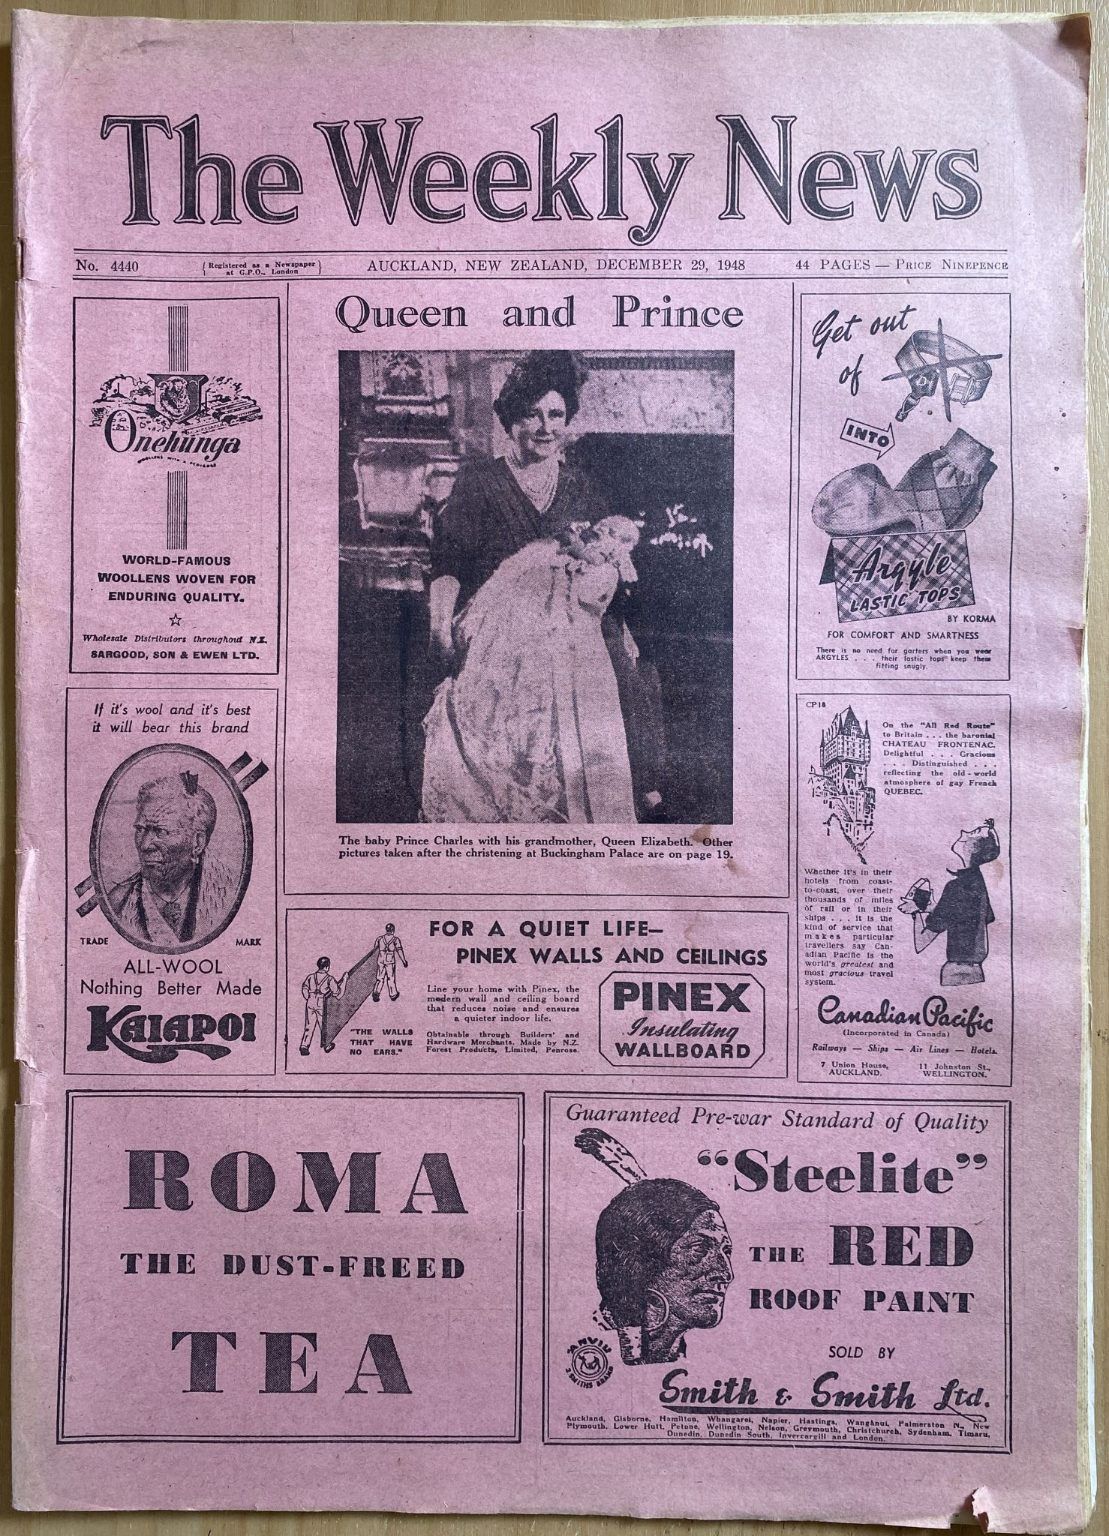 OLD NEWSPAPER: The Weekly News - No. 4440, 29 December 1948